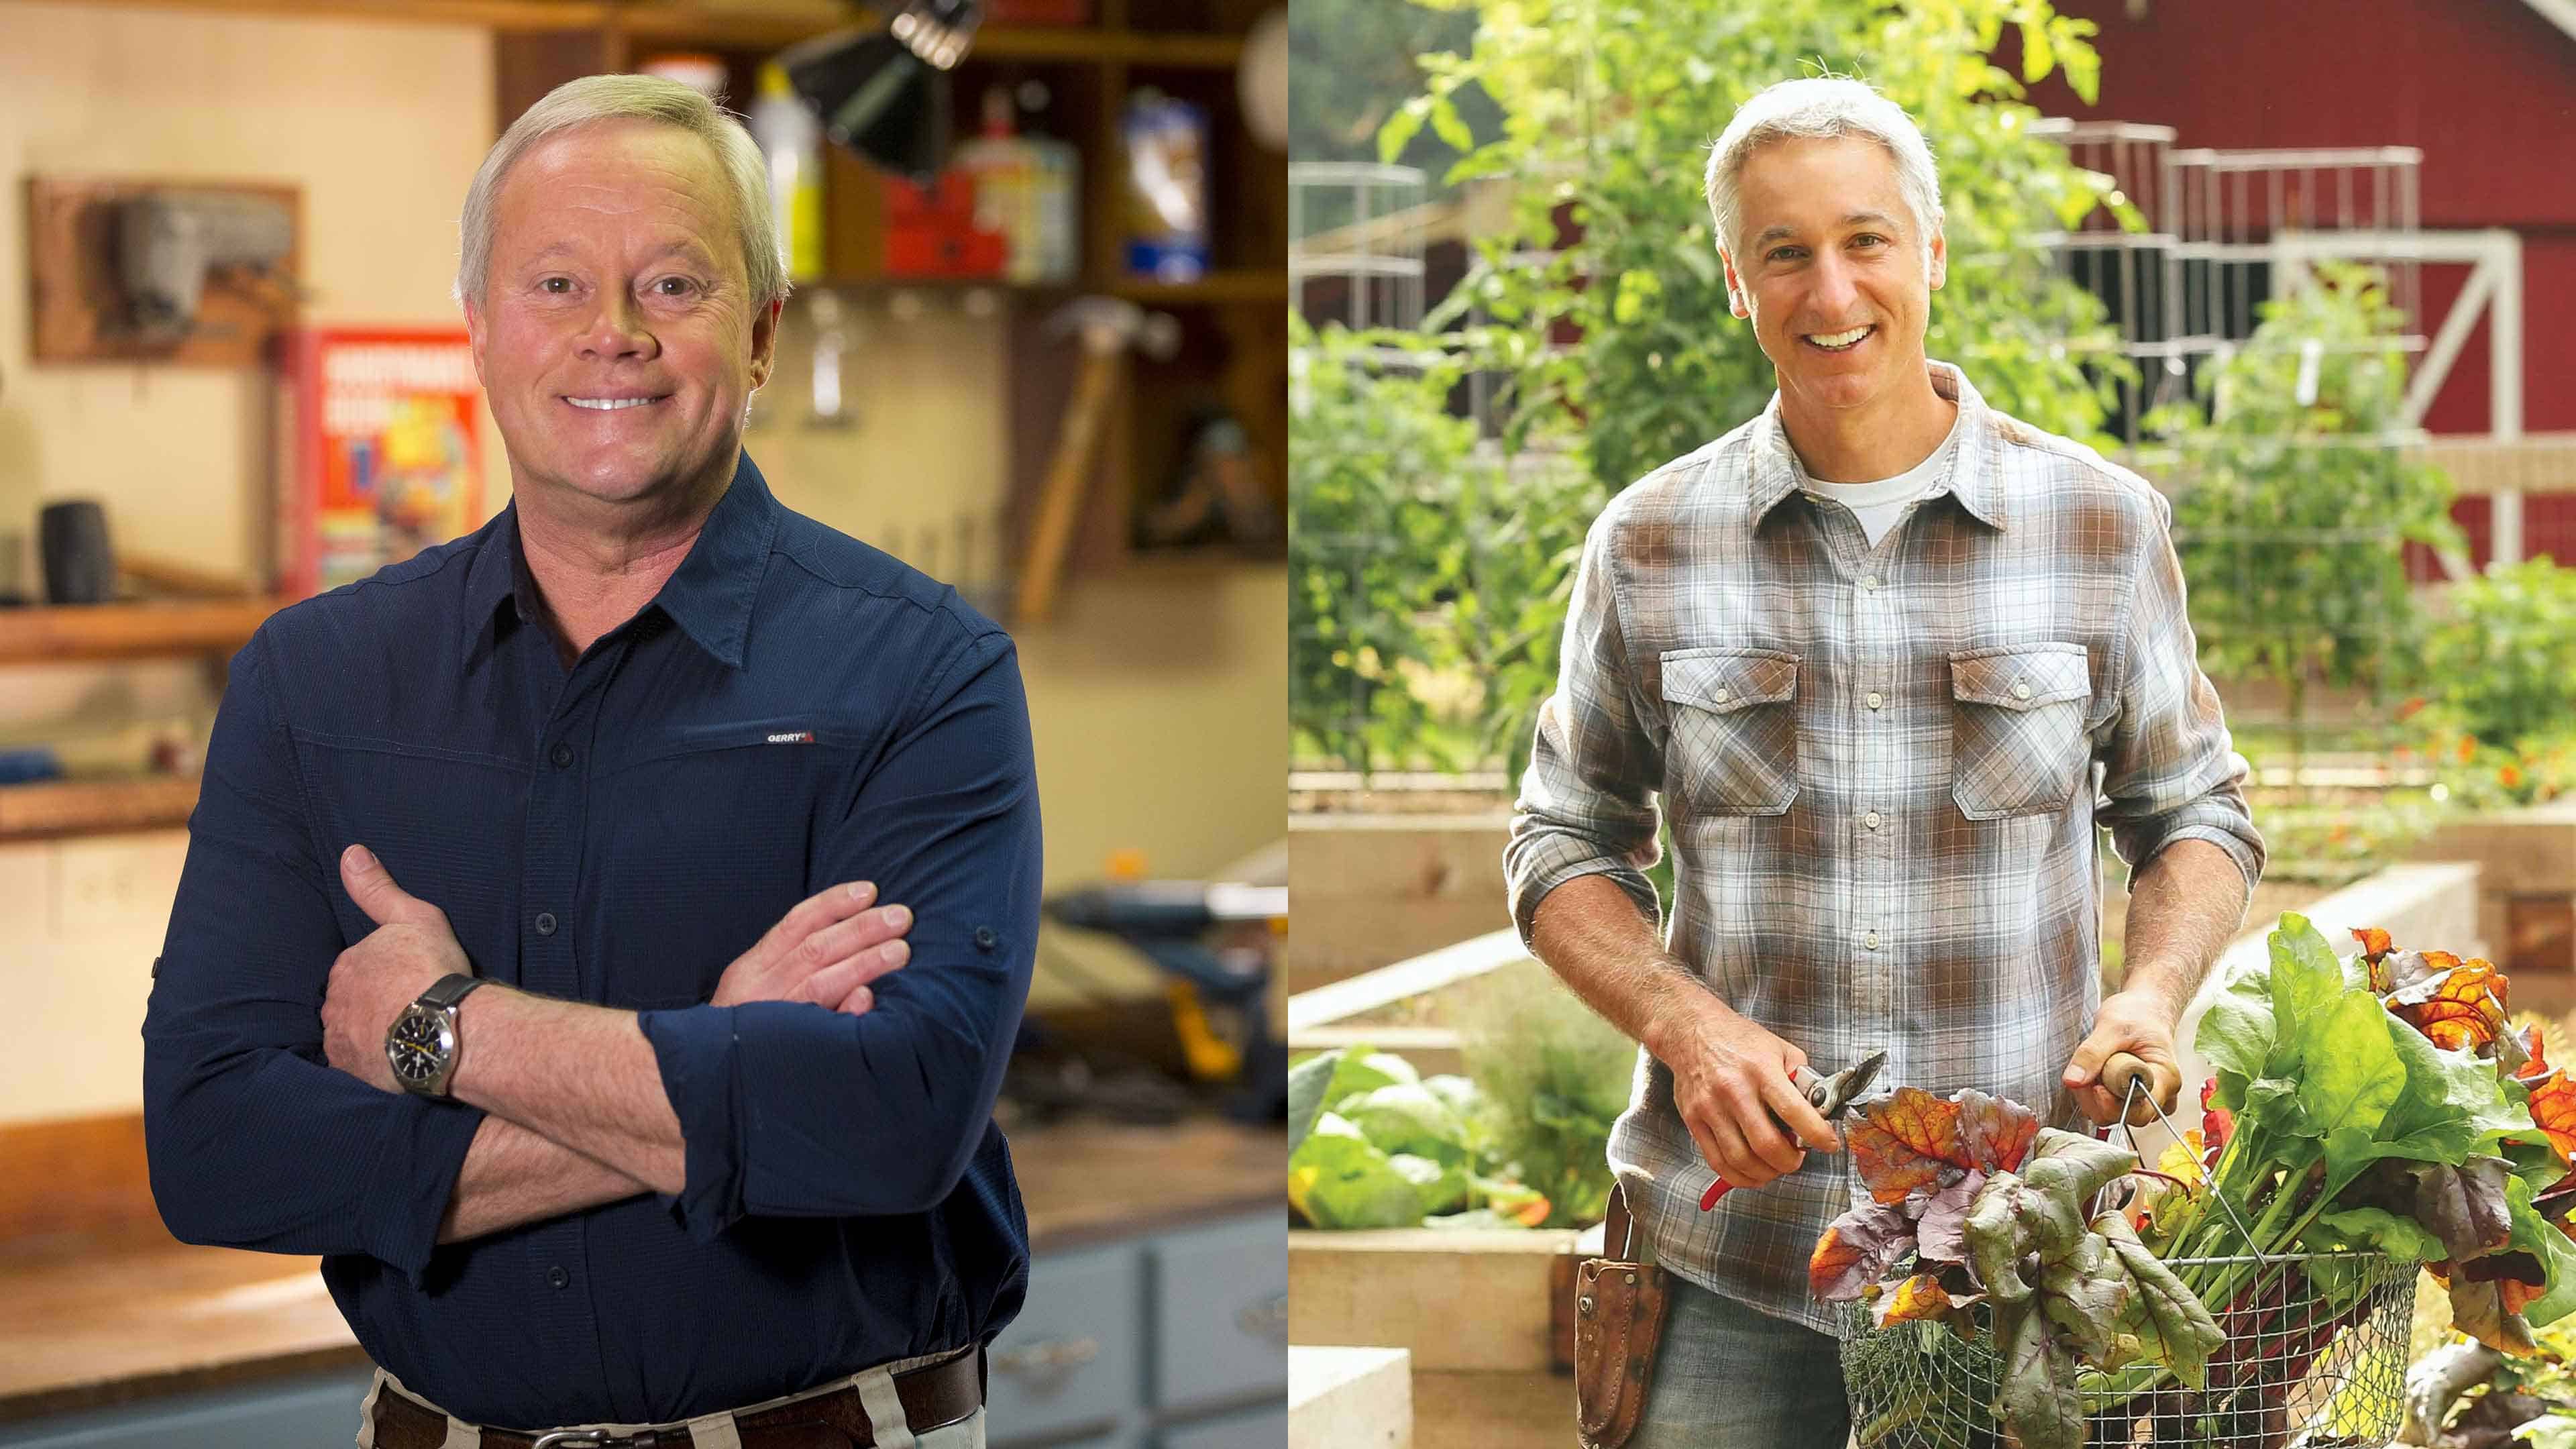 Danny Lipford, host of Today's Homeowner, and Joe Lamp'l, host of Growing a Greener World, offer fall gardening tips